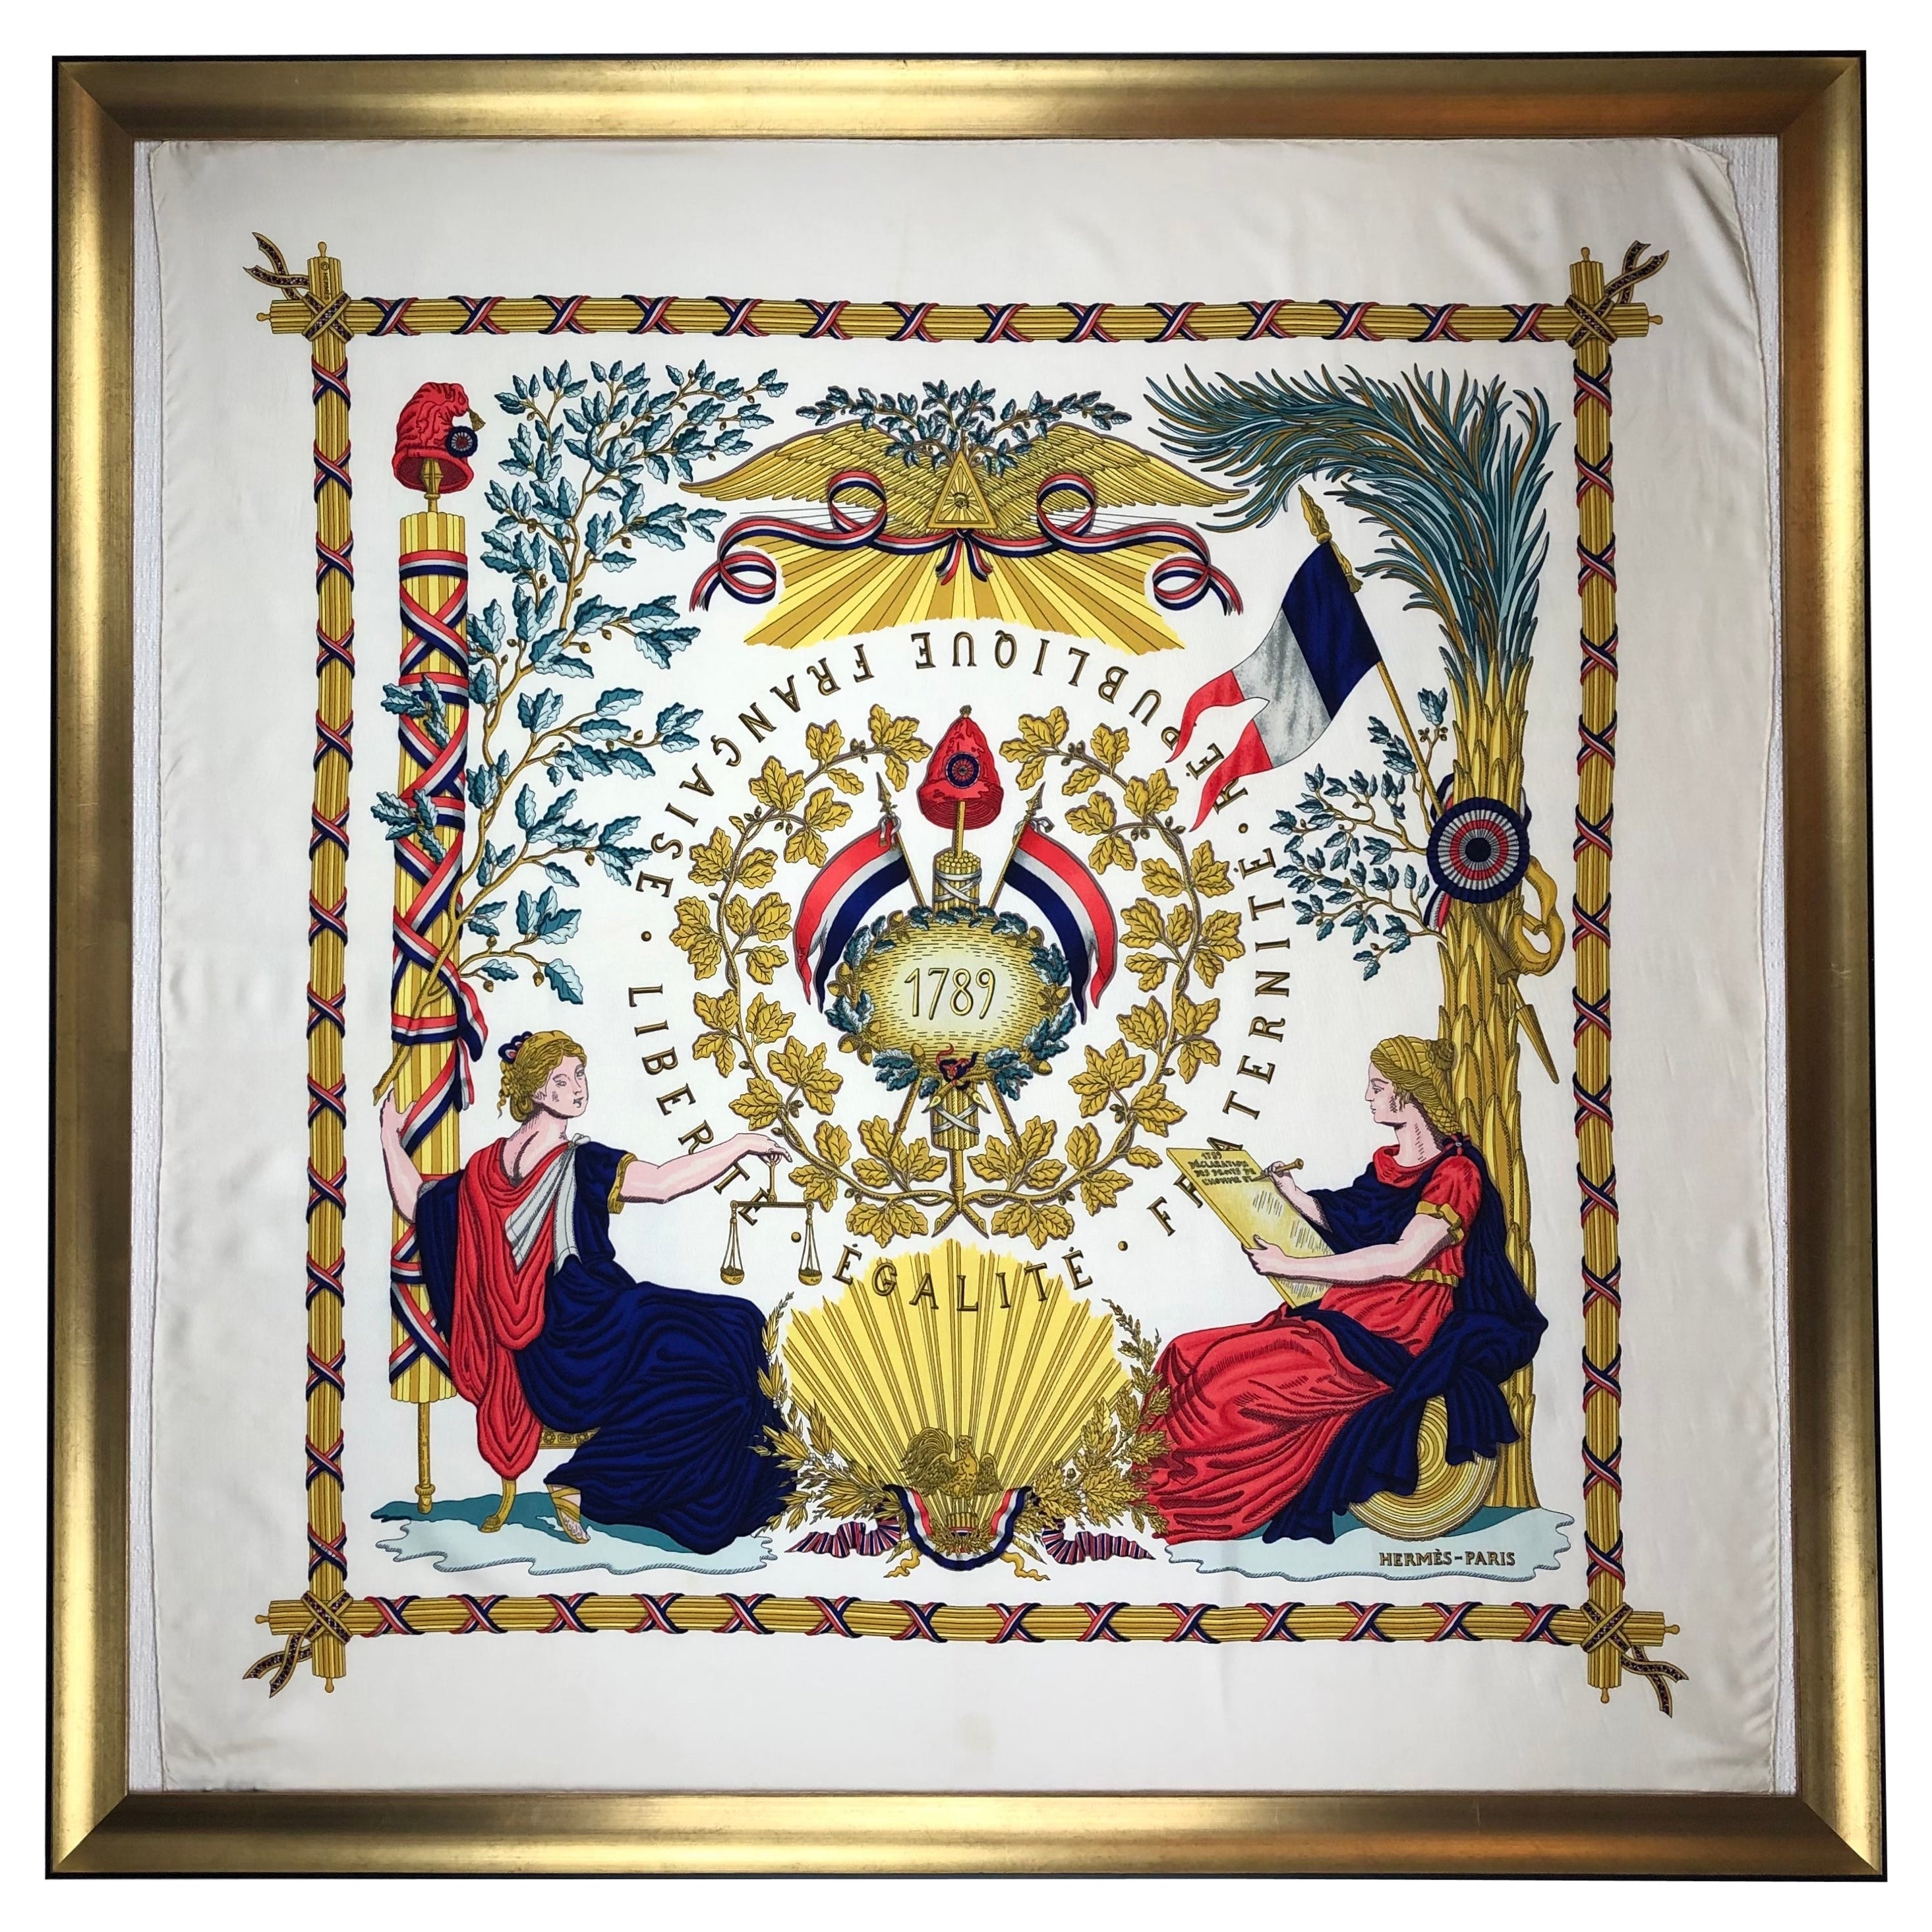 Vintage Hermes Scarf Wall Art Commemorative of the French Revolution, 1789